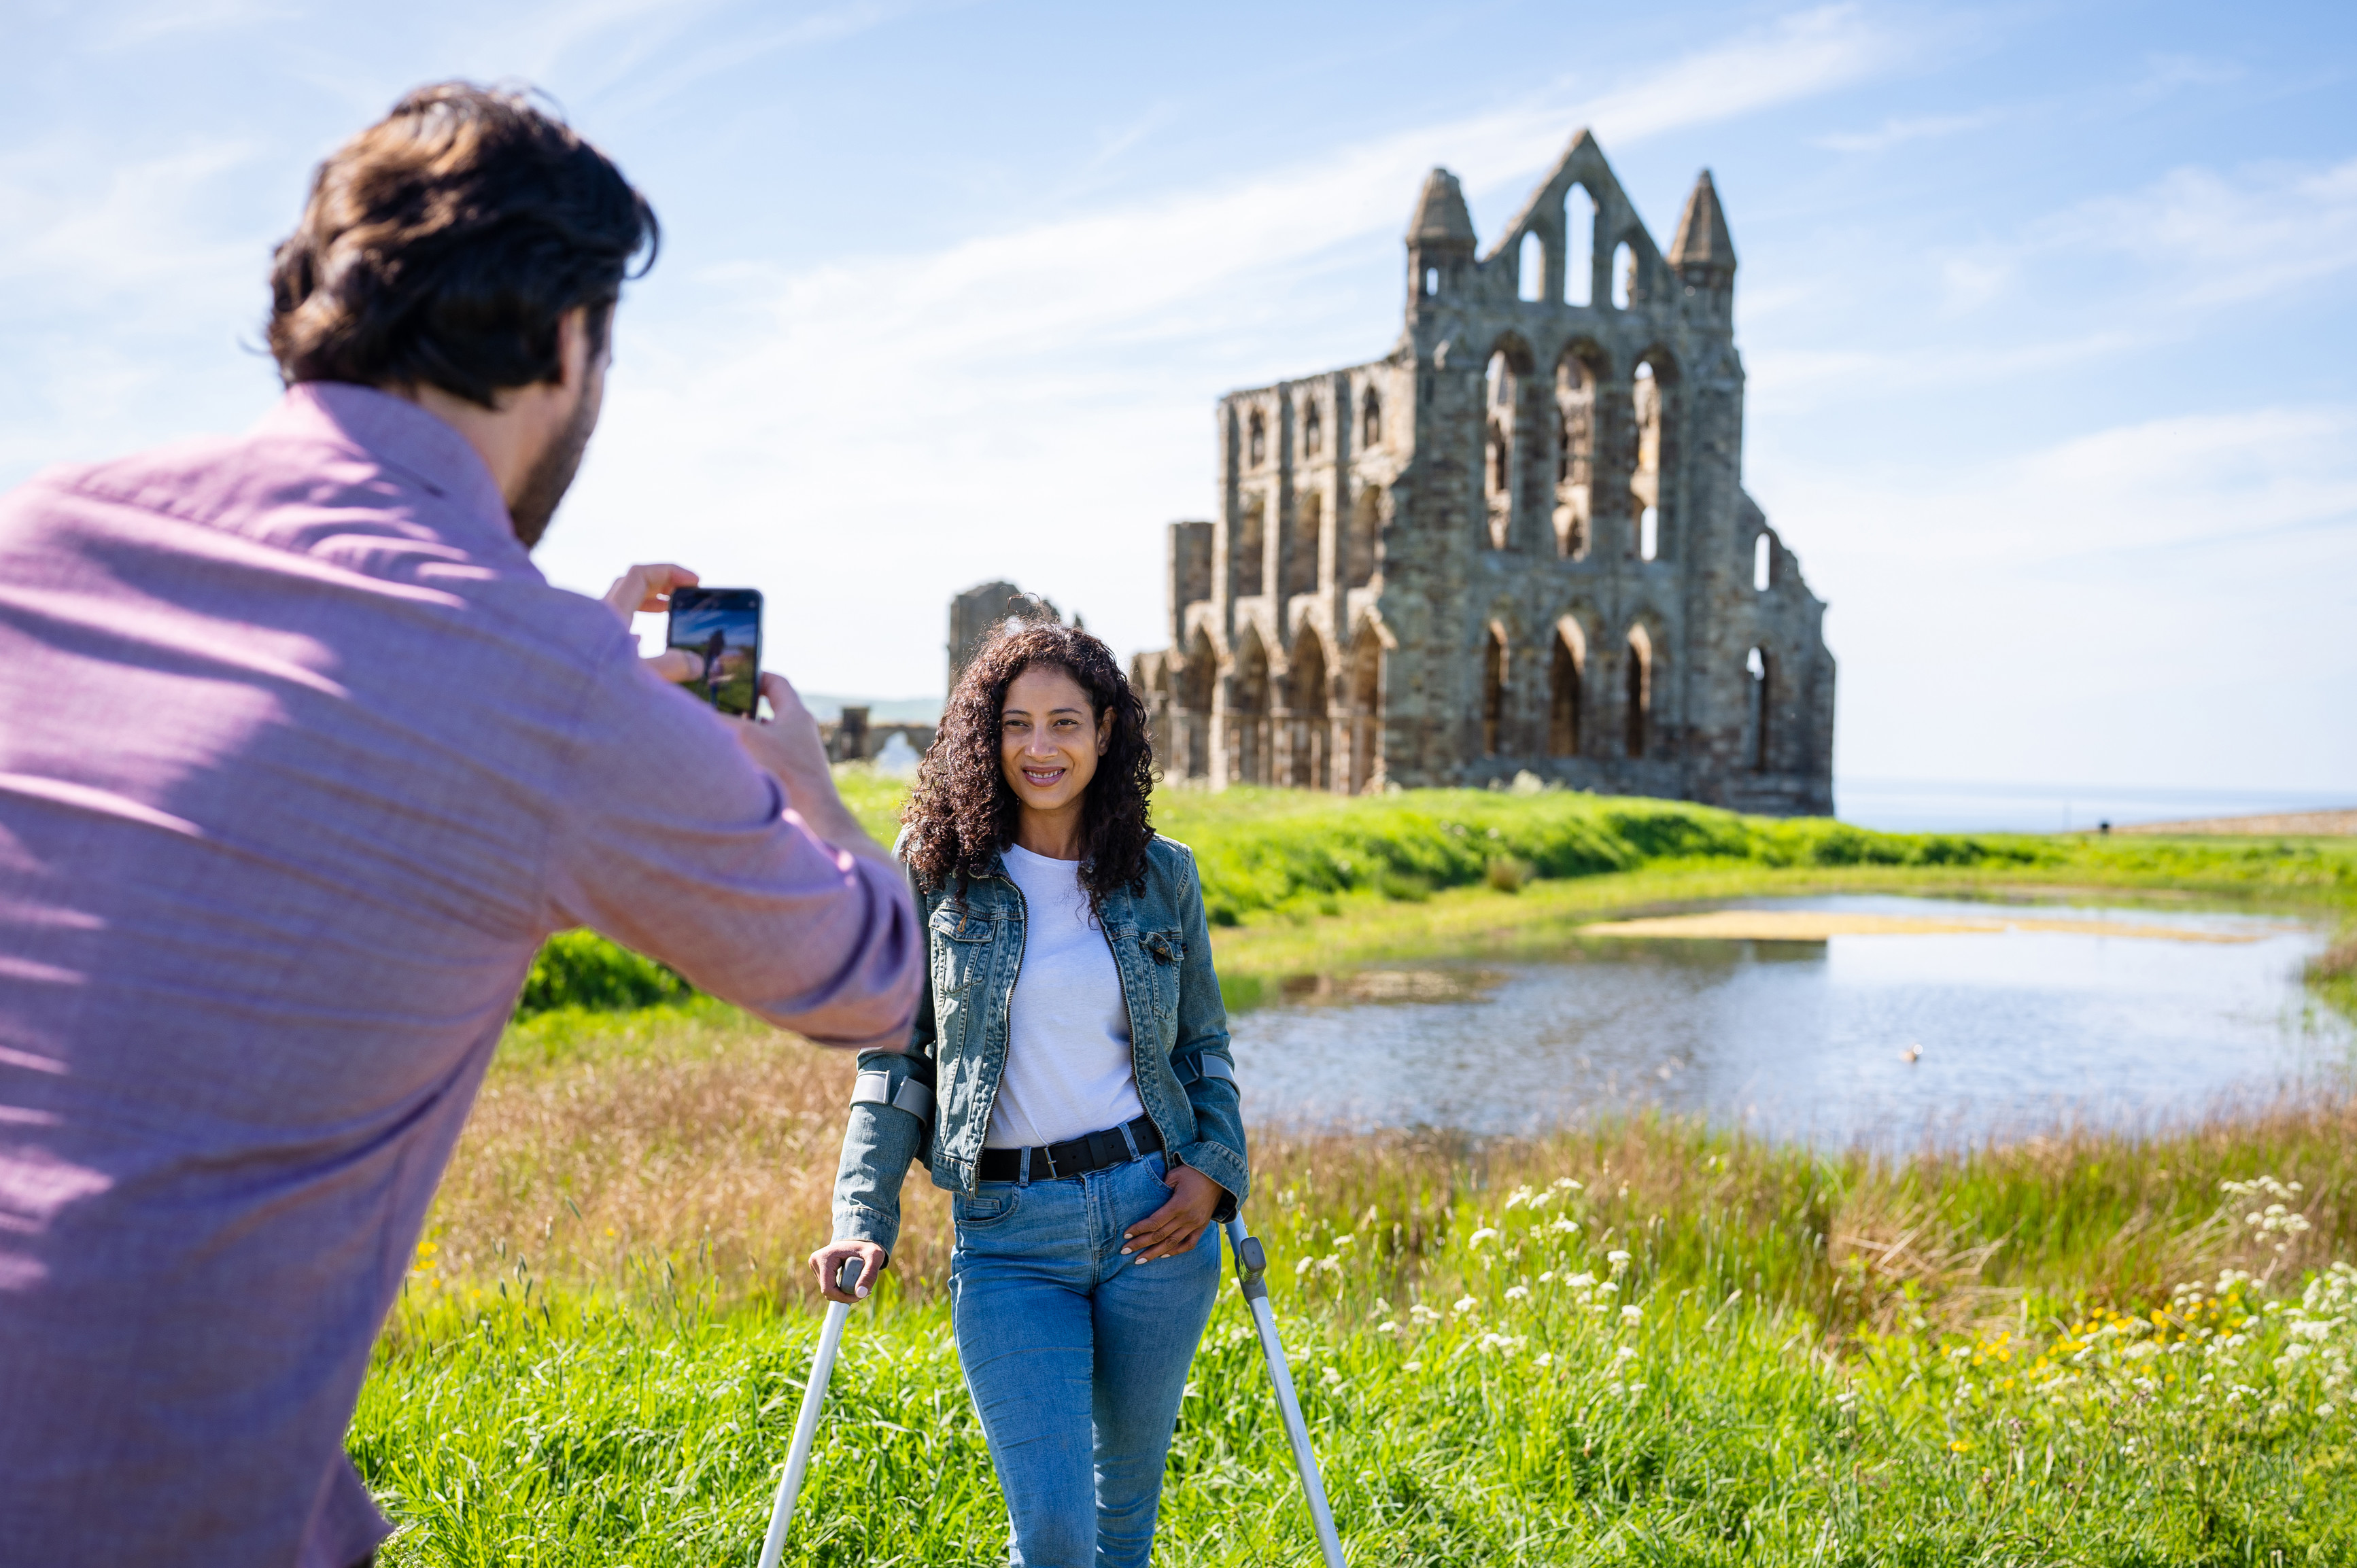 Man taking a photograph of woman, using crutches, with ruins of Whitby Abbey and lake in the background